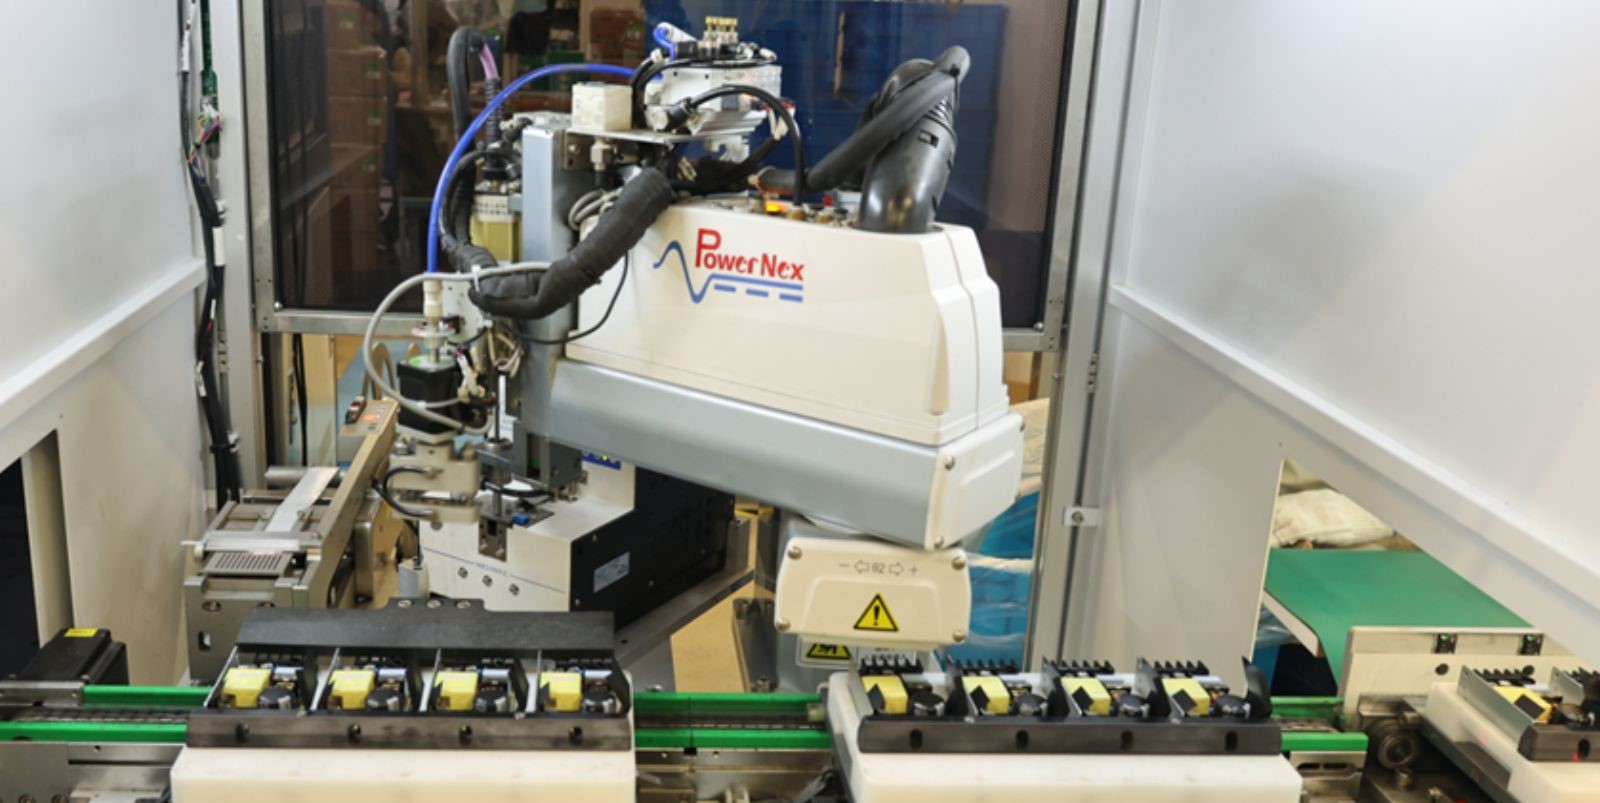 A SCARA robot core, combined with standard PowerNex functional modules, offers a rapid production solution, which can help partners transition quickly to smart manufacturing!